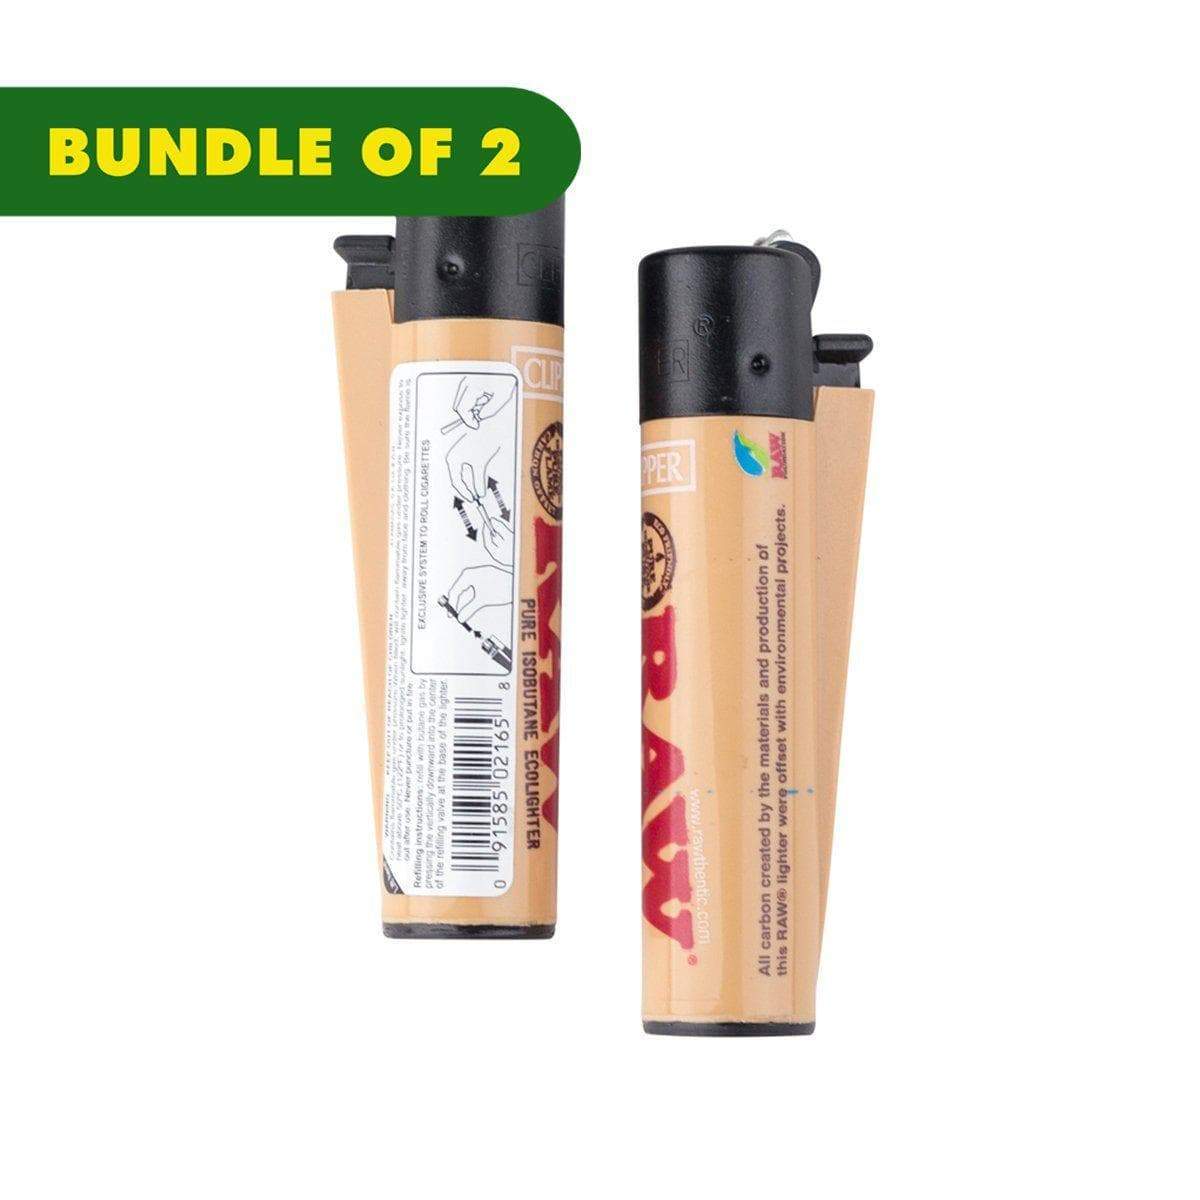 Clipper Lighter with Sleeve - Everything 420